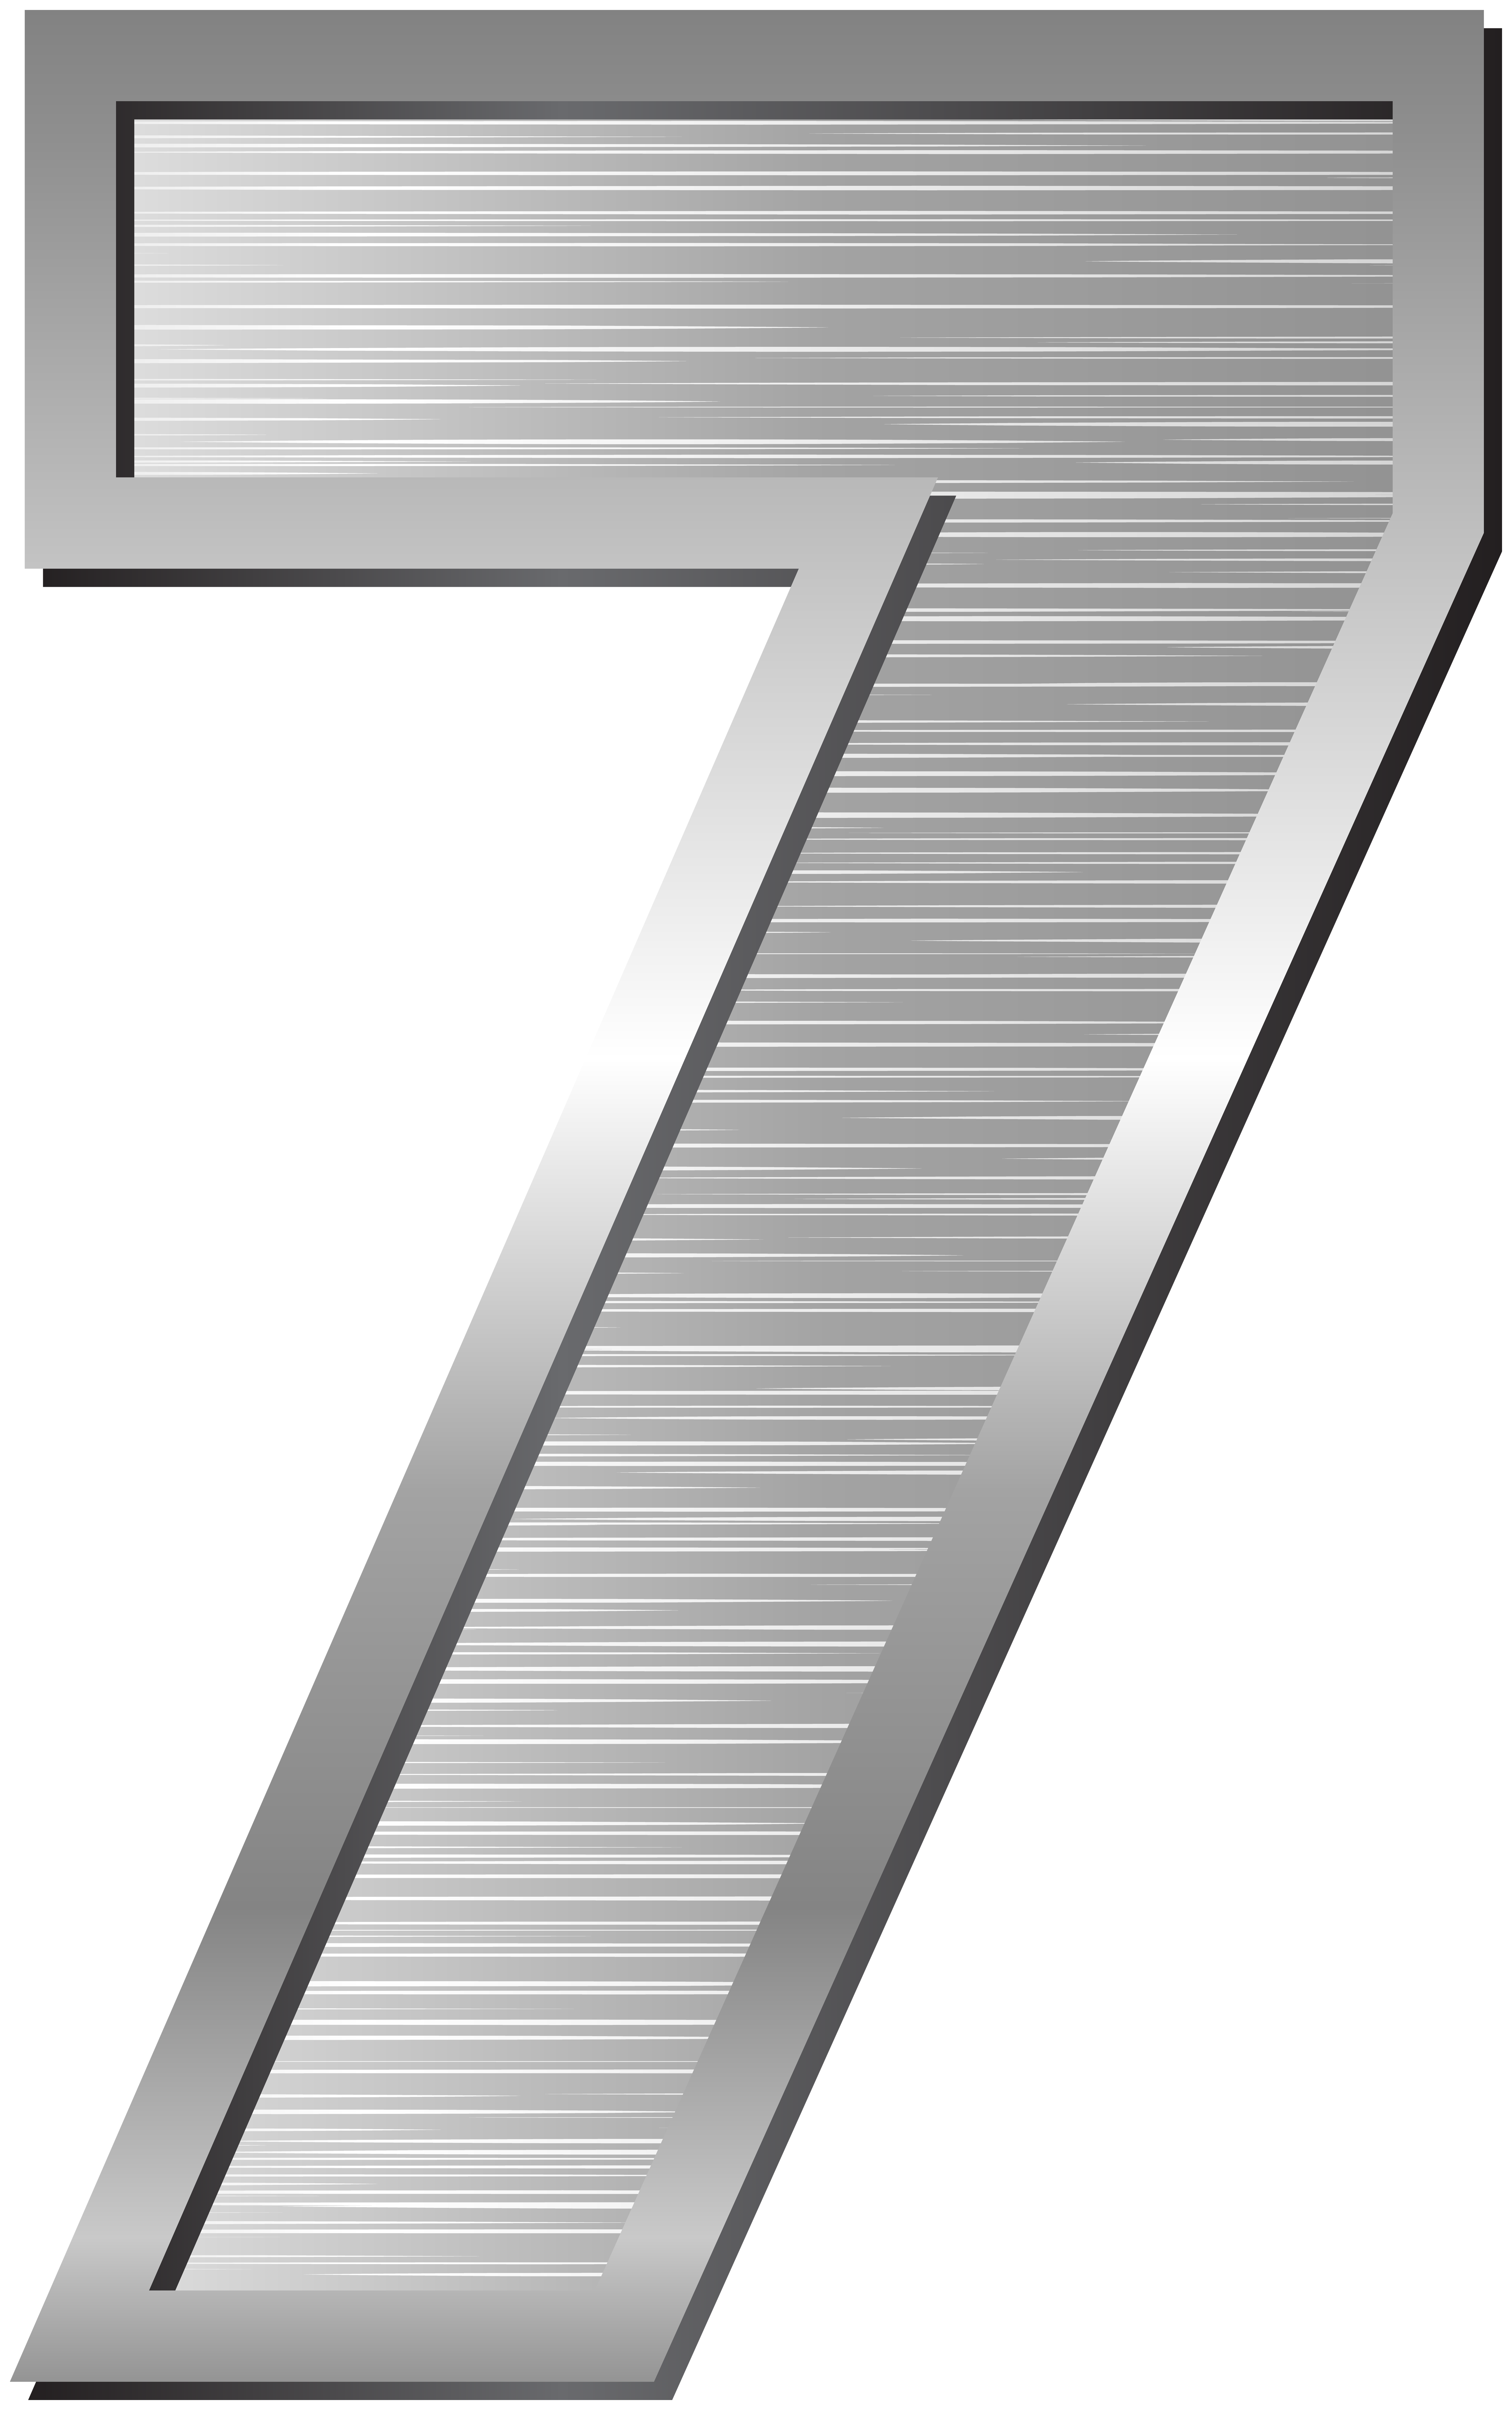 Number Seven Silver Png Clip Art Image Gallery Yopriceville High Quality Images And Transparent Png Free Clipart